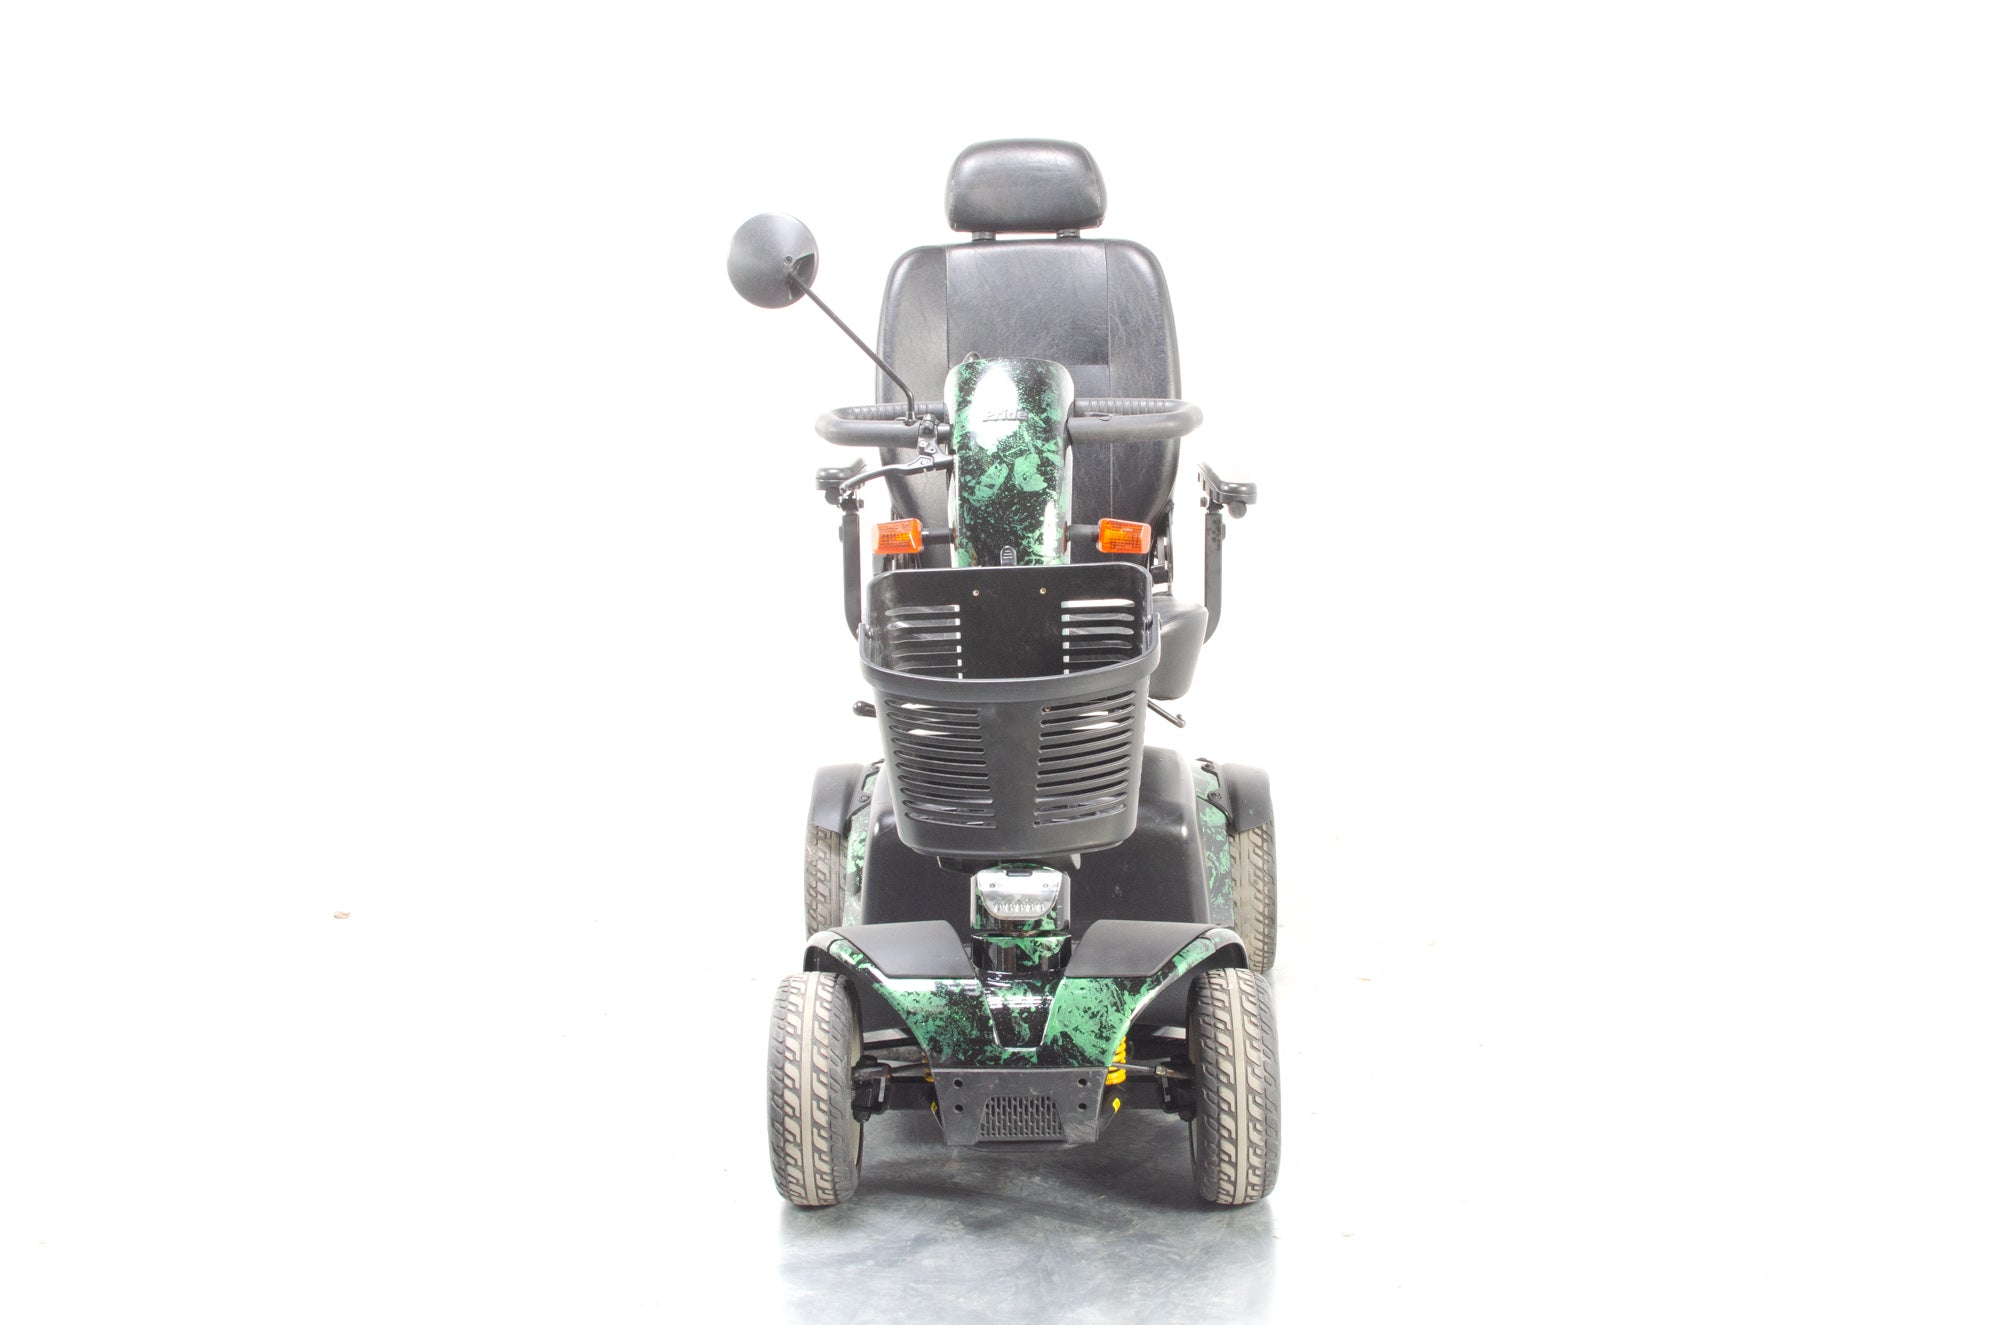 Pride Colt Sport Used Electric Mobility Scooter 8mph Transportable Road & Pavement